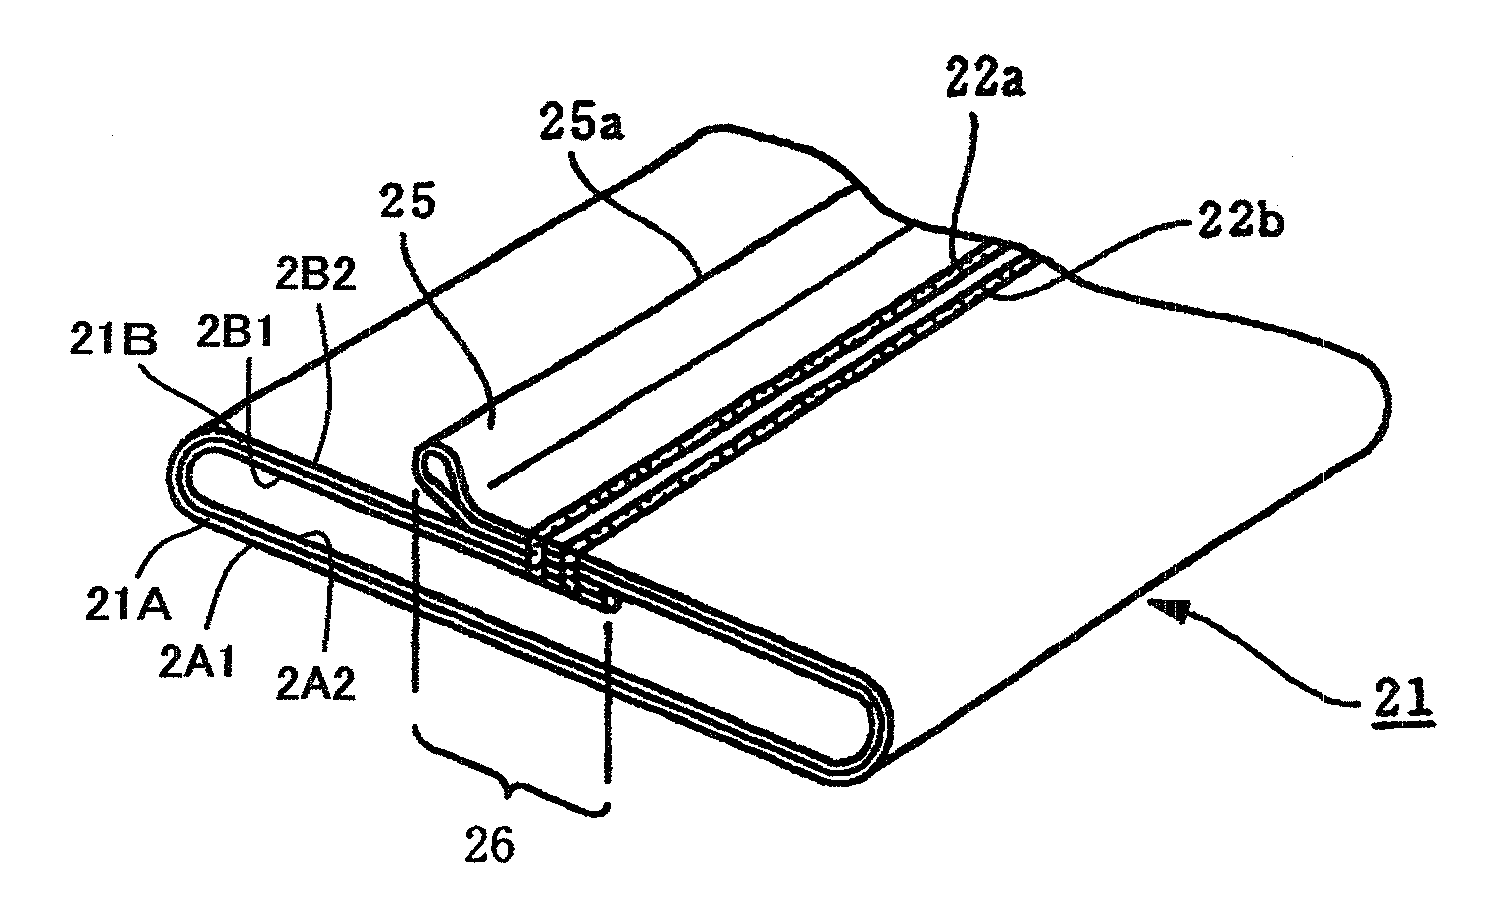 Material-filled package